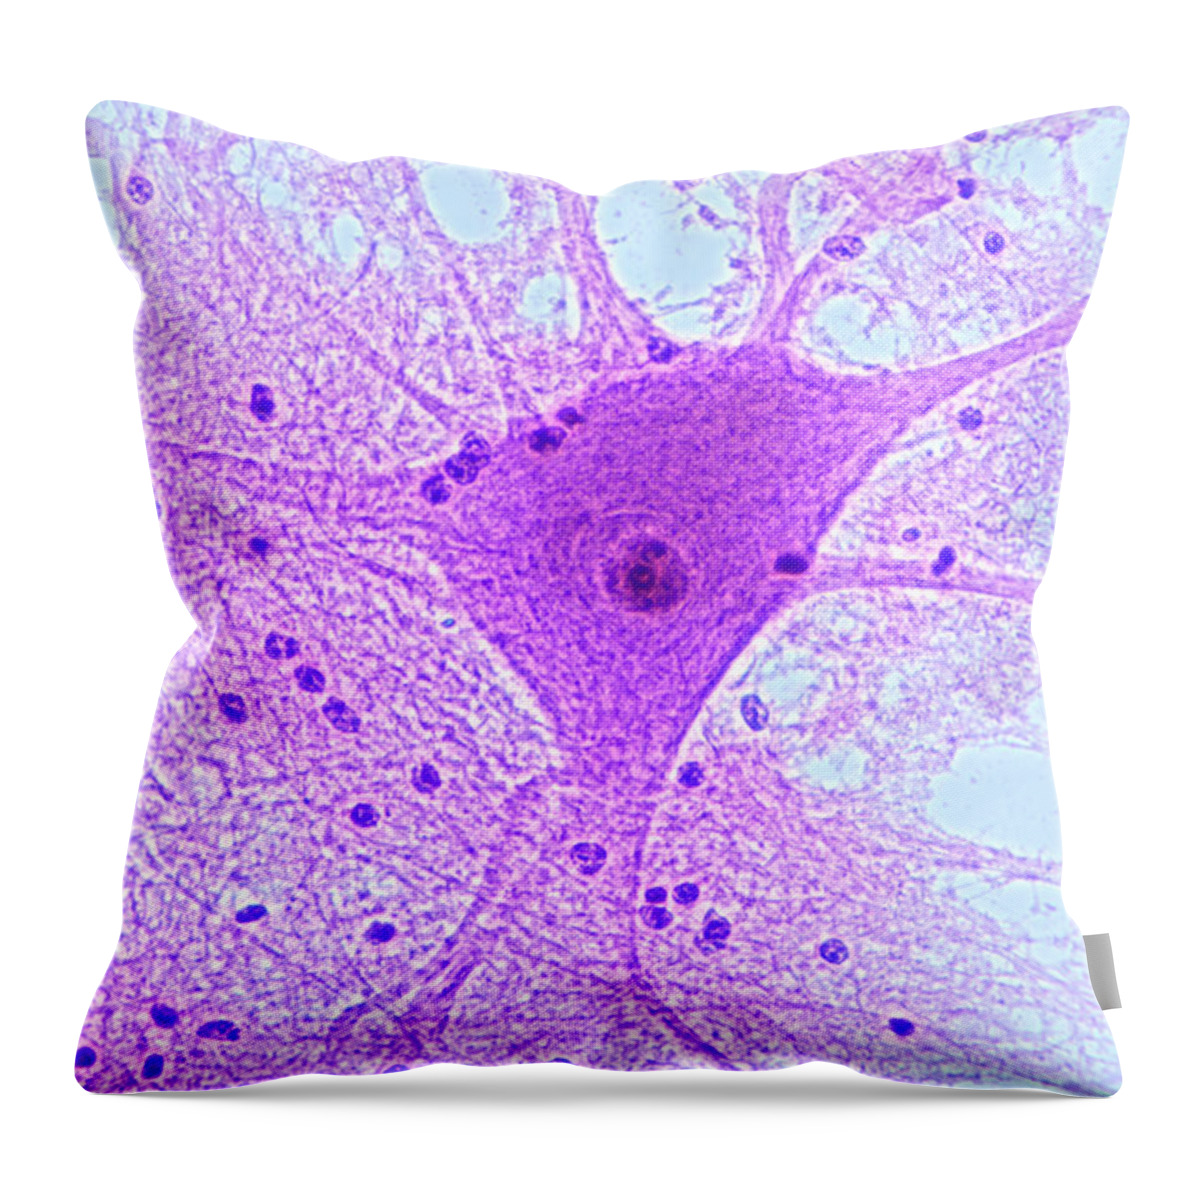 Histology Throw Pillow featuring the photograph Motor Neuron From Spinal Cord by M I Walker